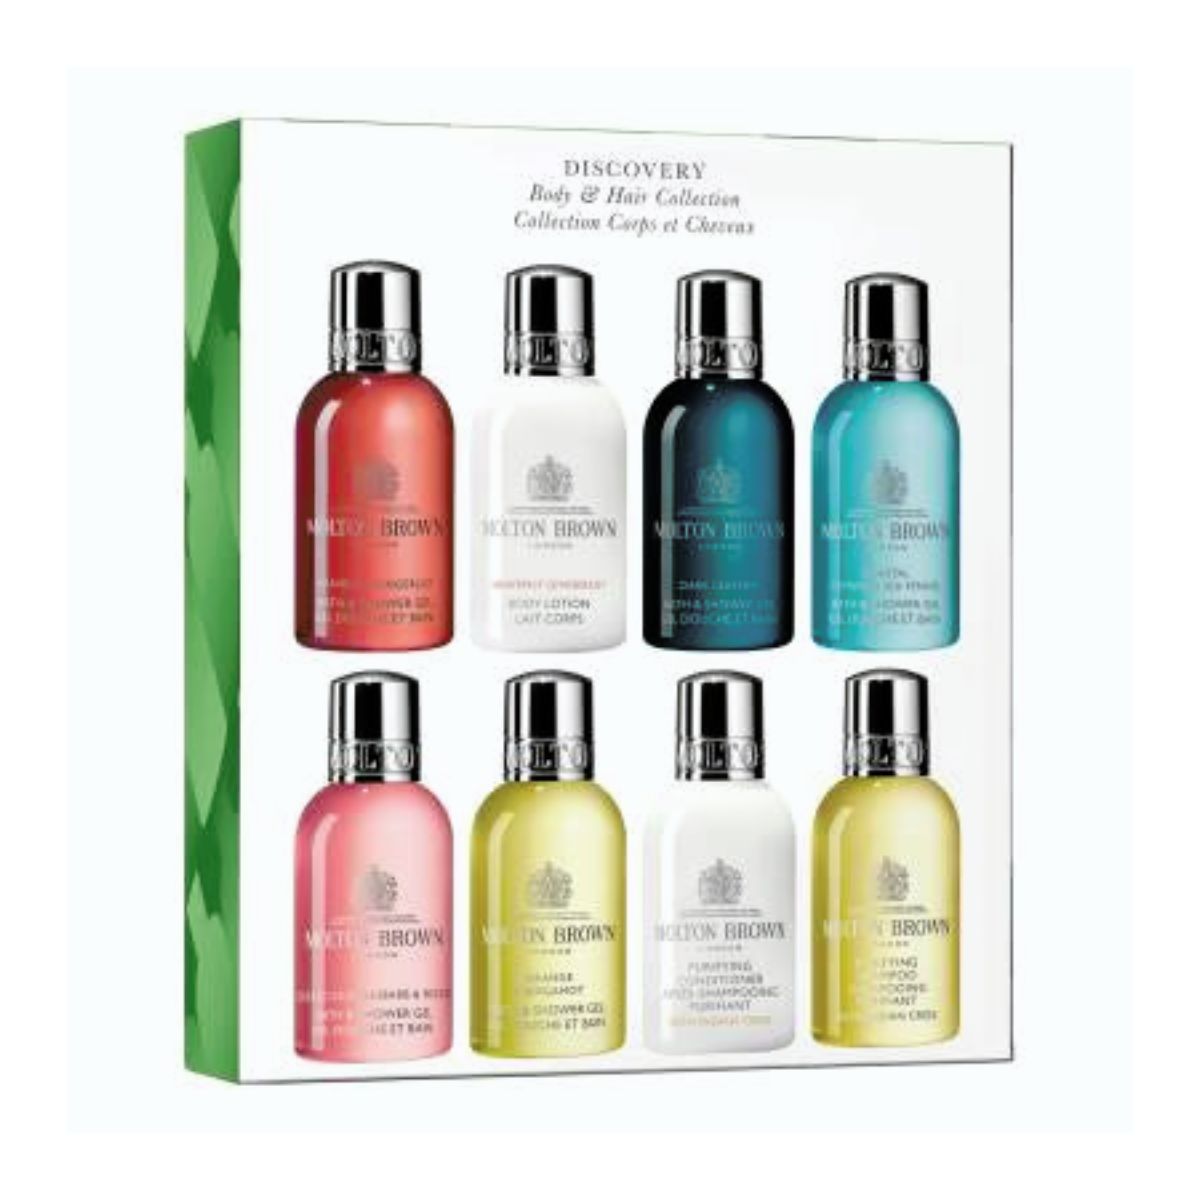 Molton Brown Discovery Body & Hair Collection SAVE 33%